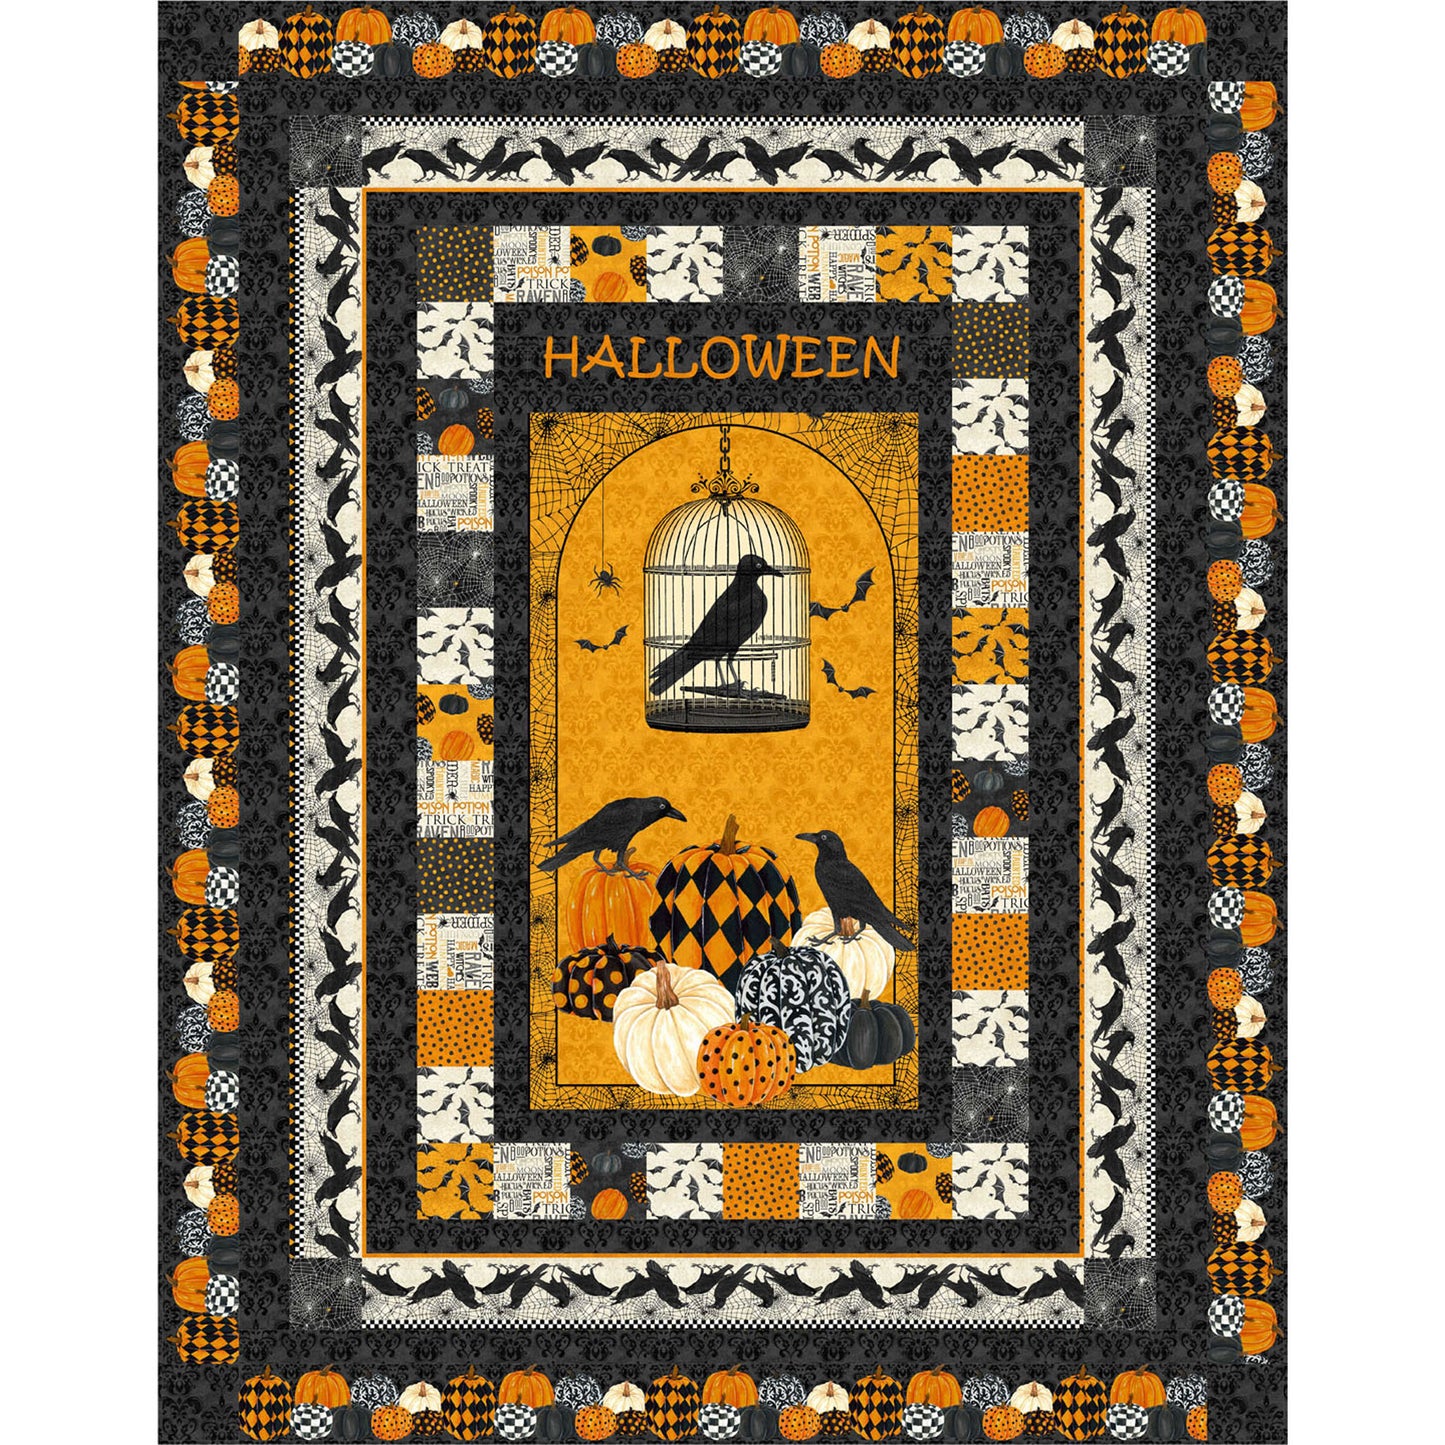 A Halloween-themed quilt featuring main feature of panel showcasing ravens and pumpkins. Bordered by orange, black, and white squares of fun matching Halloween fabrics and bordered by a row of ravens and then pumpkins on the final border.